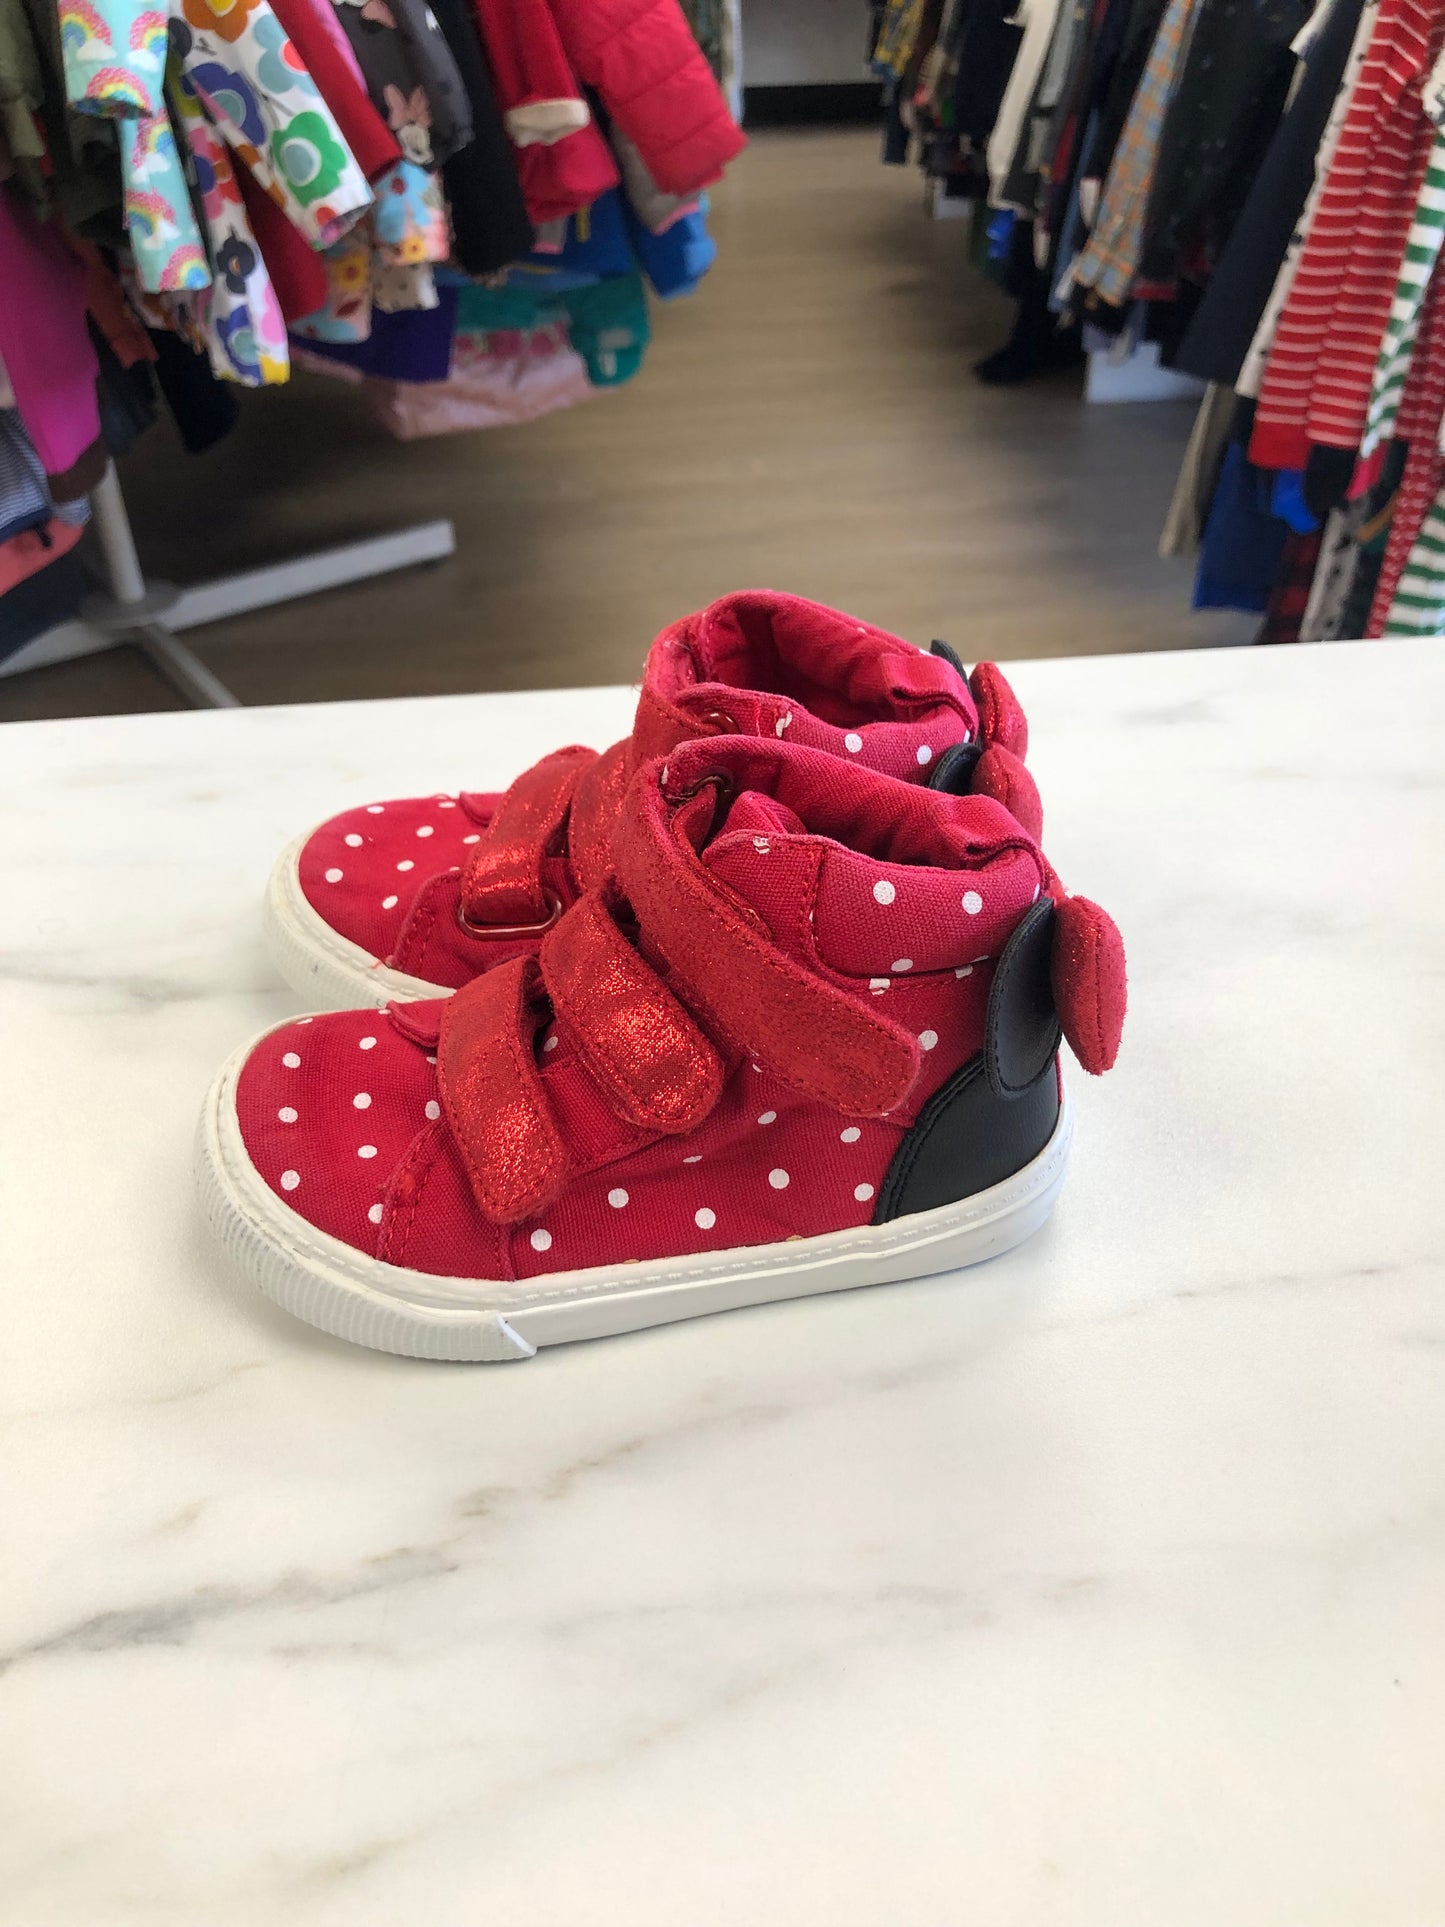 GAP Child Size 7 Red polka dot Shoes/Boots